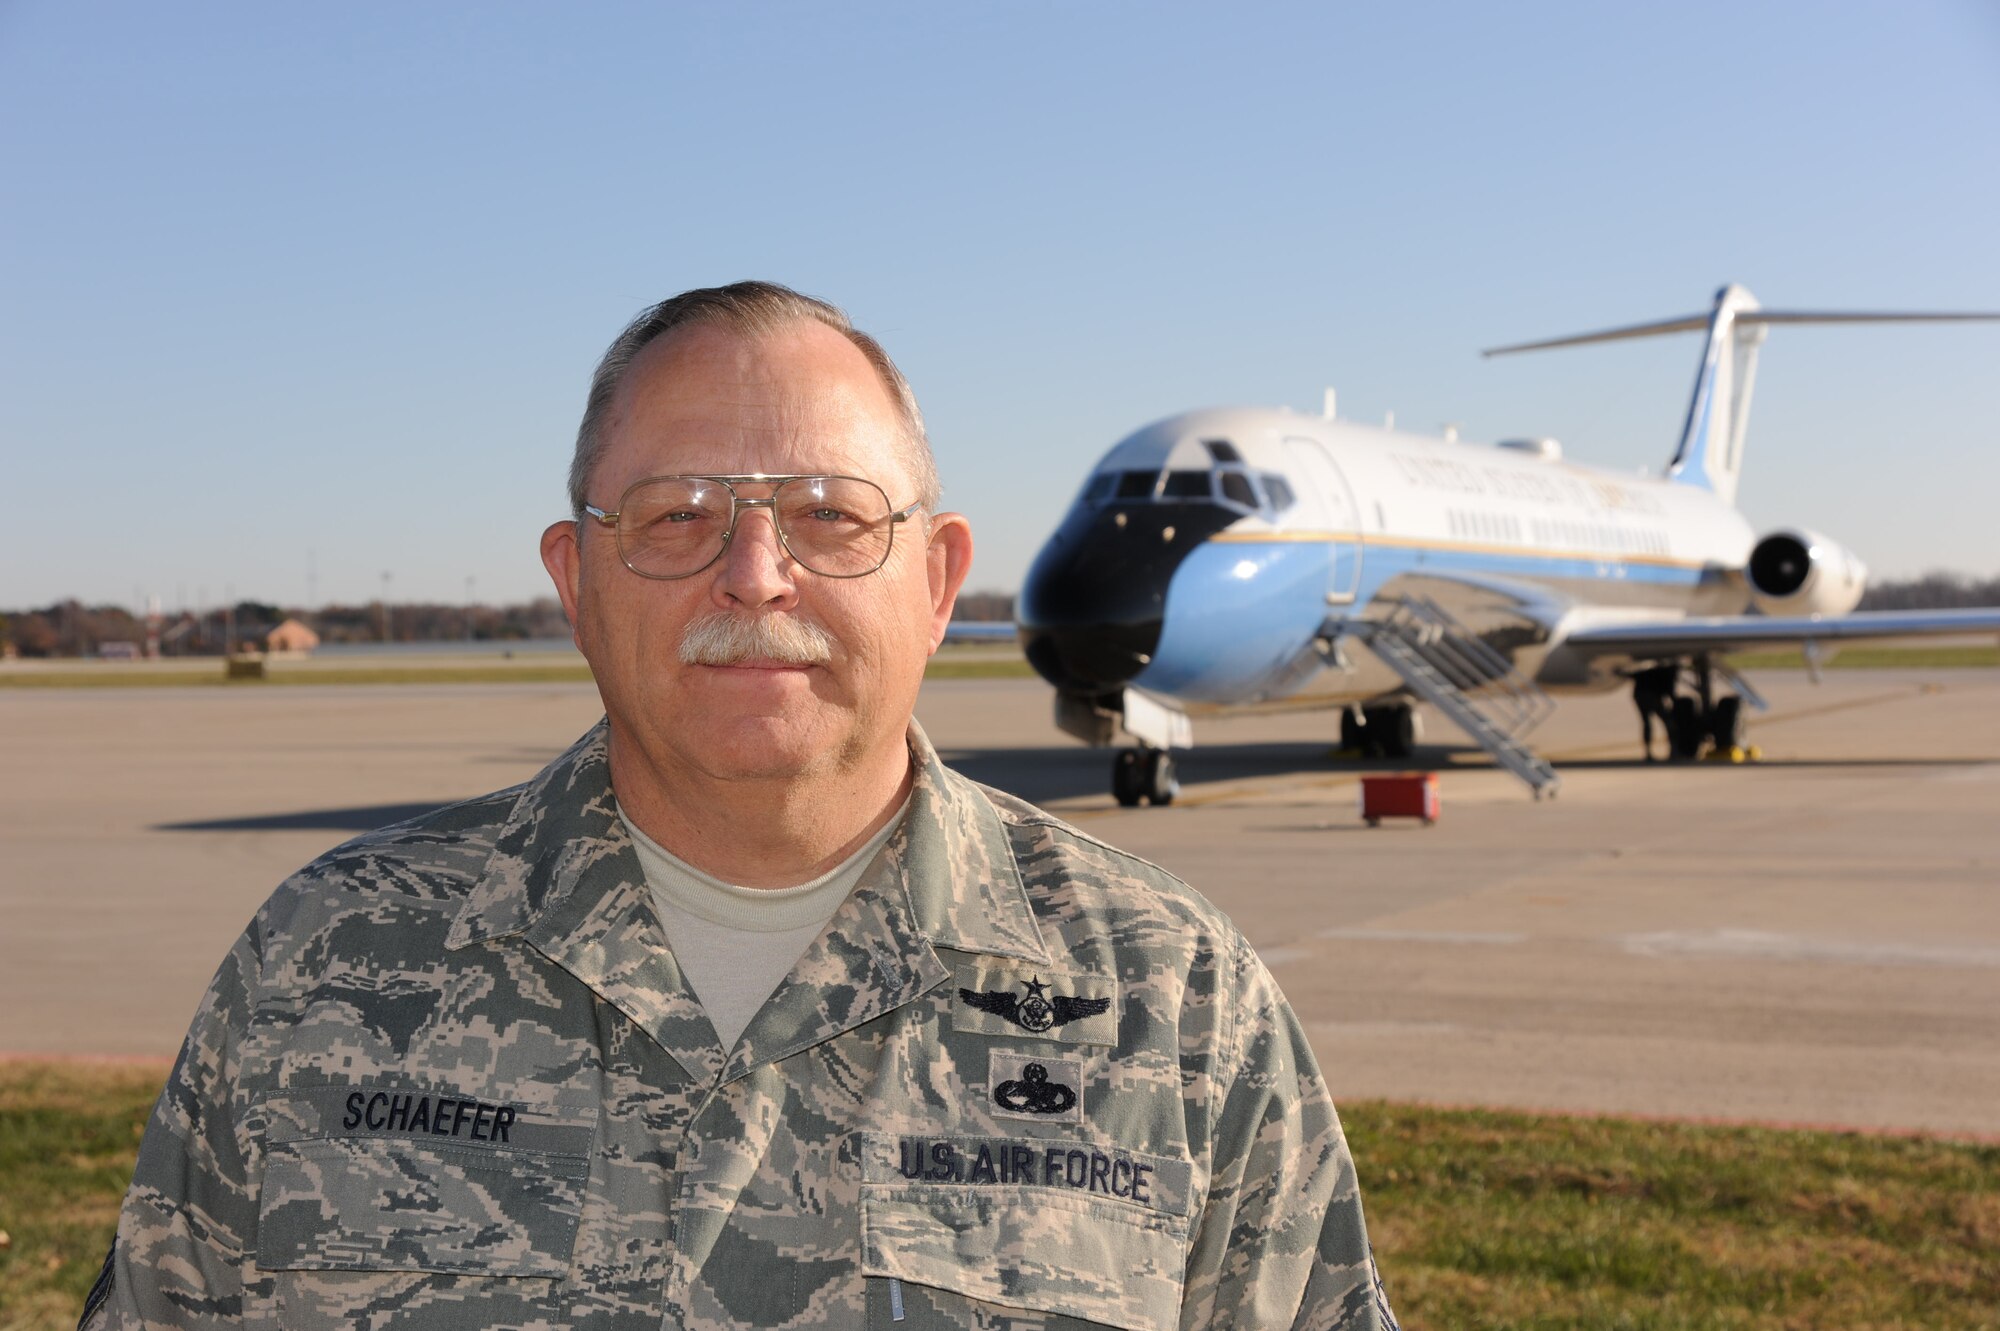 Master Sgt. Don Schaefer stands in front of the 932nd Airlift Wing's C-9C airplane as he prepares to retire from the Air Force Reserve Command.  His previous job was with the 939th Airlift Wing in Oregon.  "I have spent from September 1976 till present in the Air Force Reserve. I did not really start out thinking, 'I am a military type guy,' but looking back at it now I guess you could say I am," he concluded.  (U.S. Air Force photo/Maj. Stan Paregien)